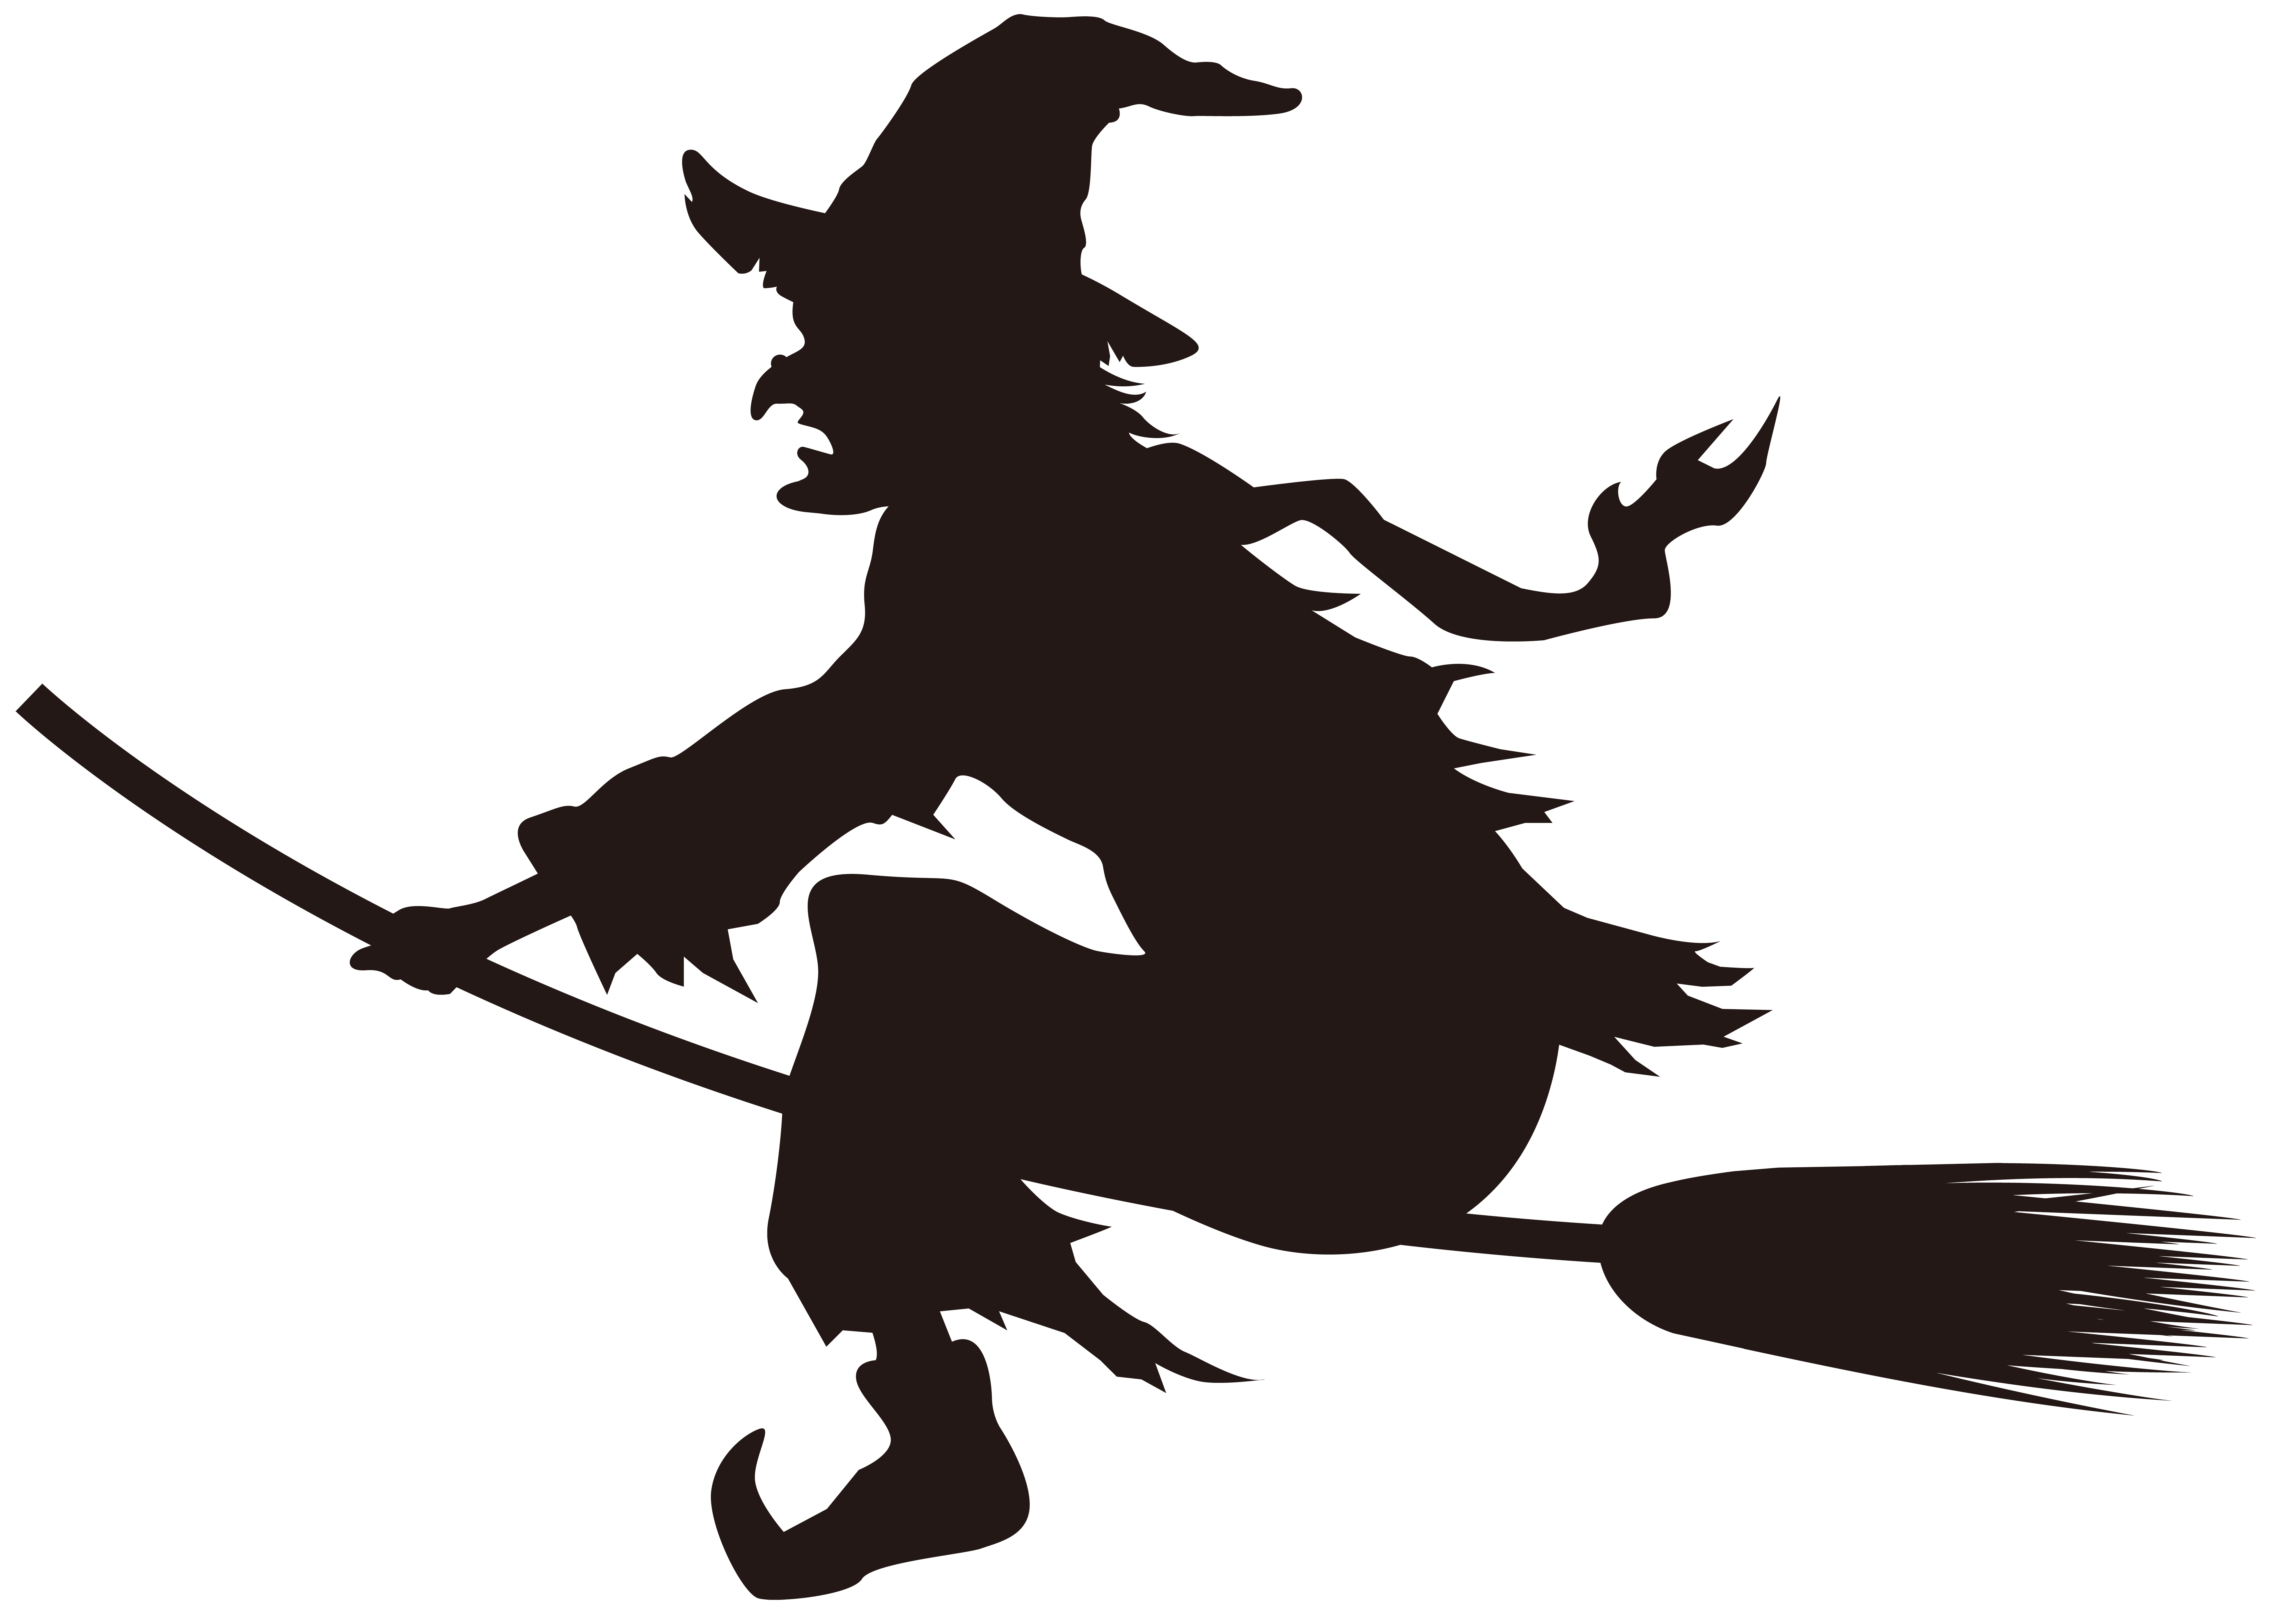 Halloween Witch On Broom Clip Art – Clipart Free Download